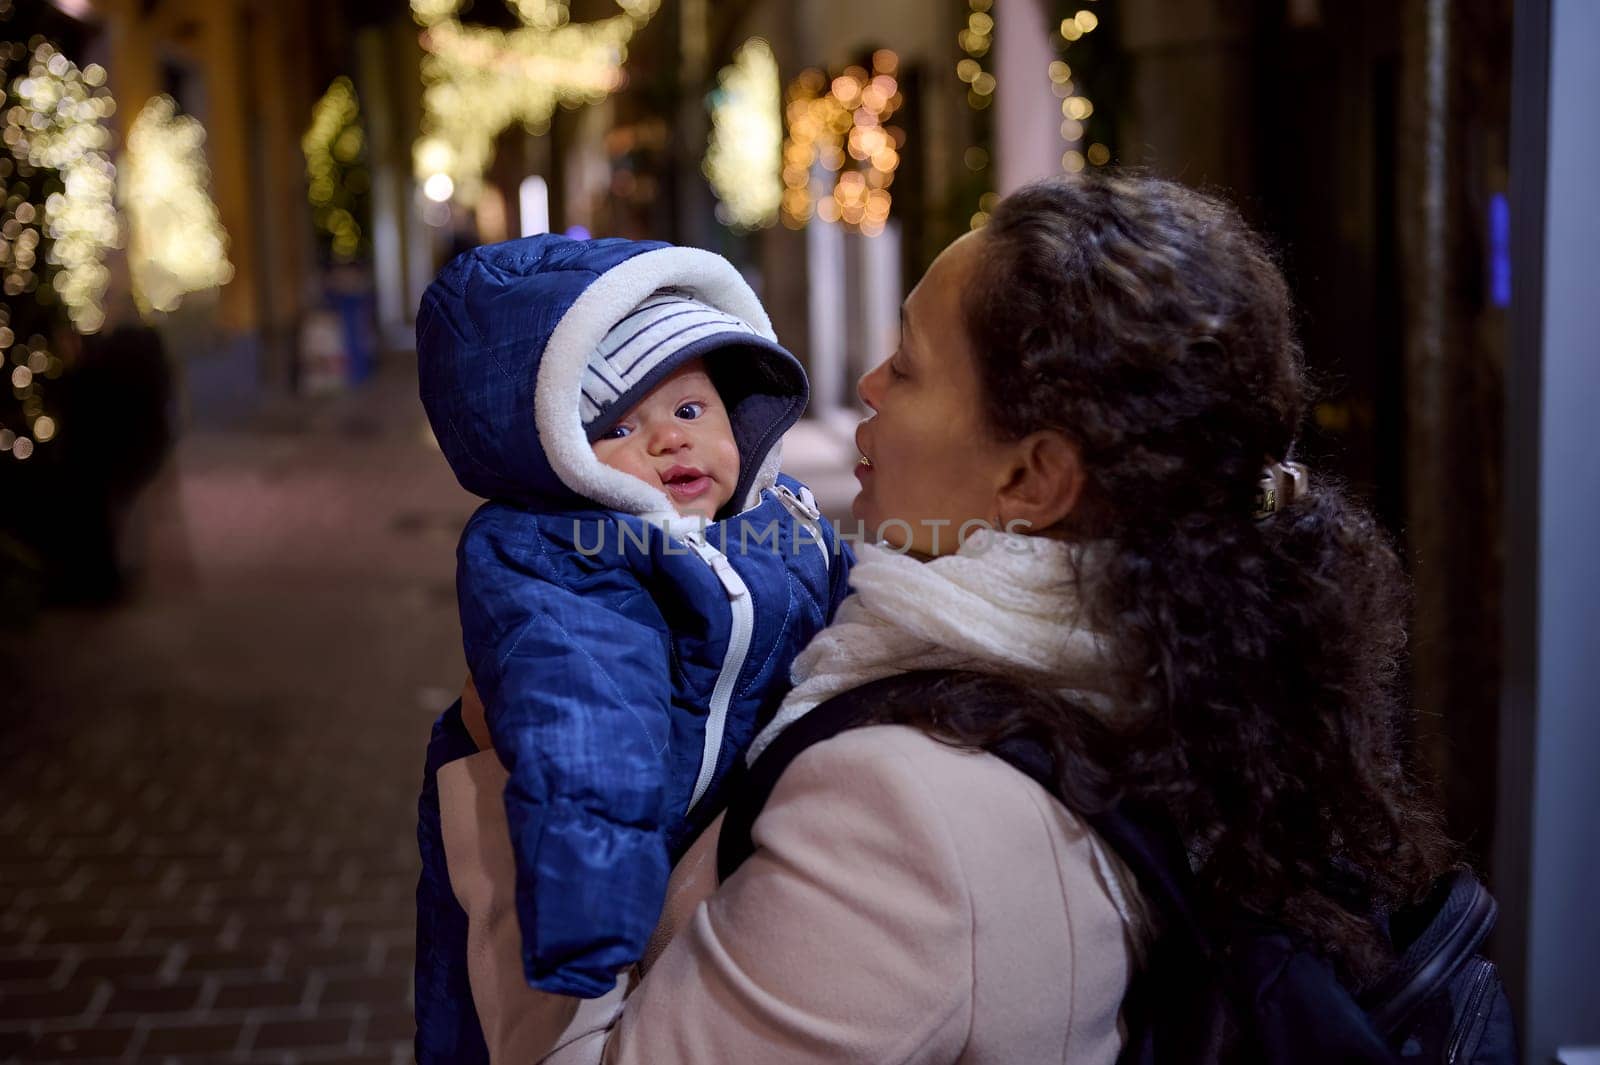 Beautiful young woman, mother holding her baby boy looking at camera, standing together in the street at night in elegant touristic city Como of Italy, decorated with beautiful garlands for Christmas